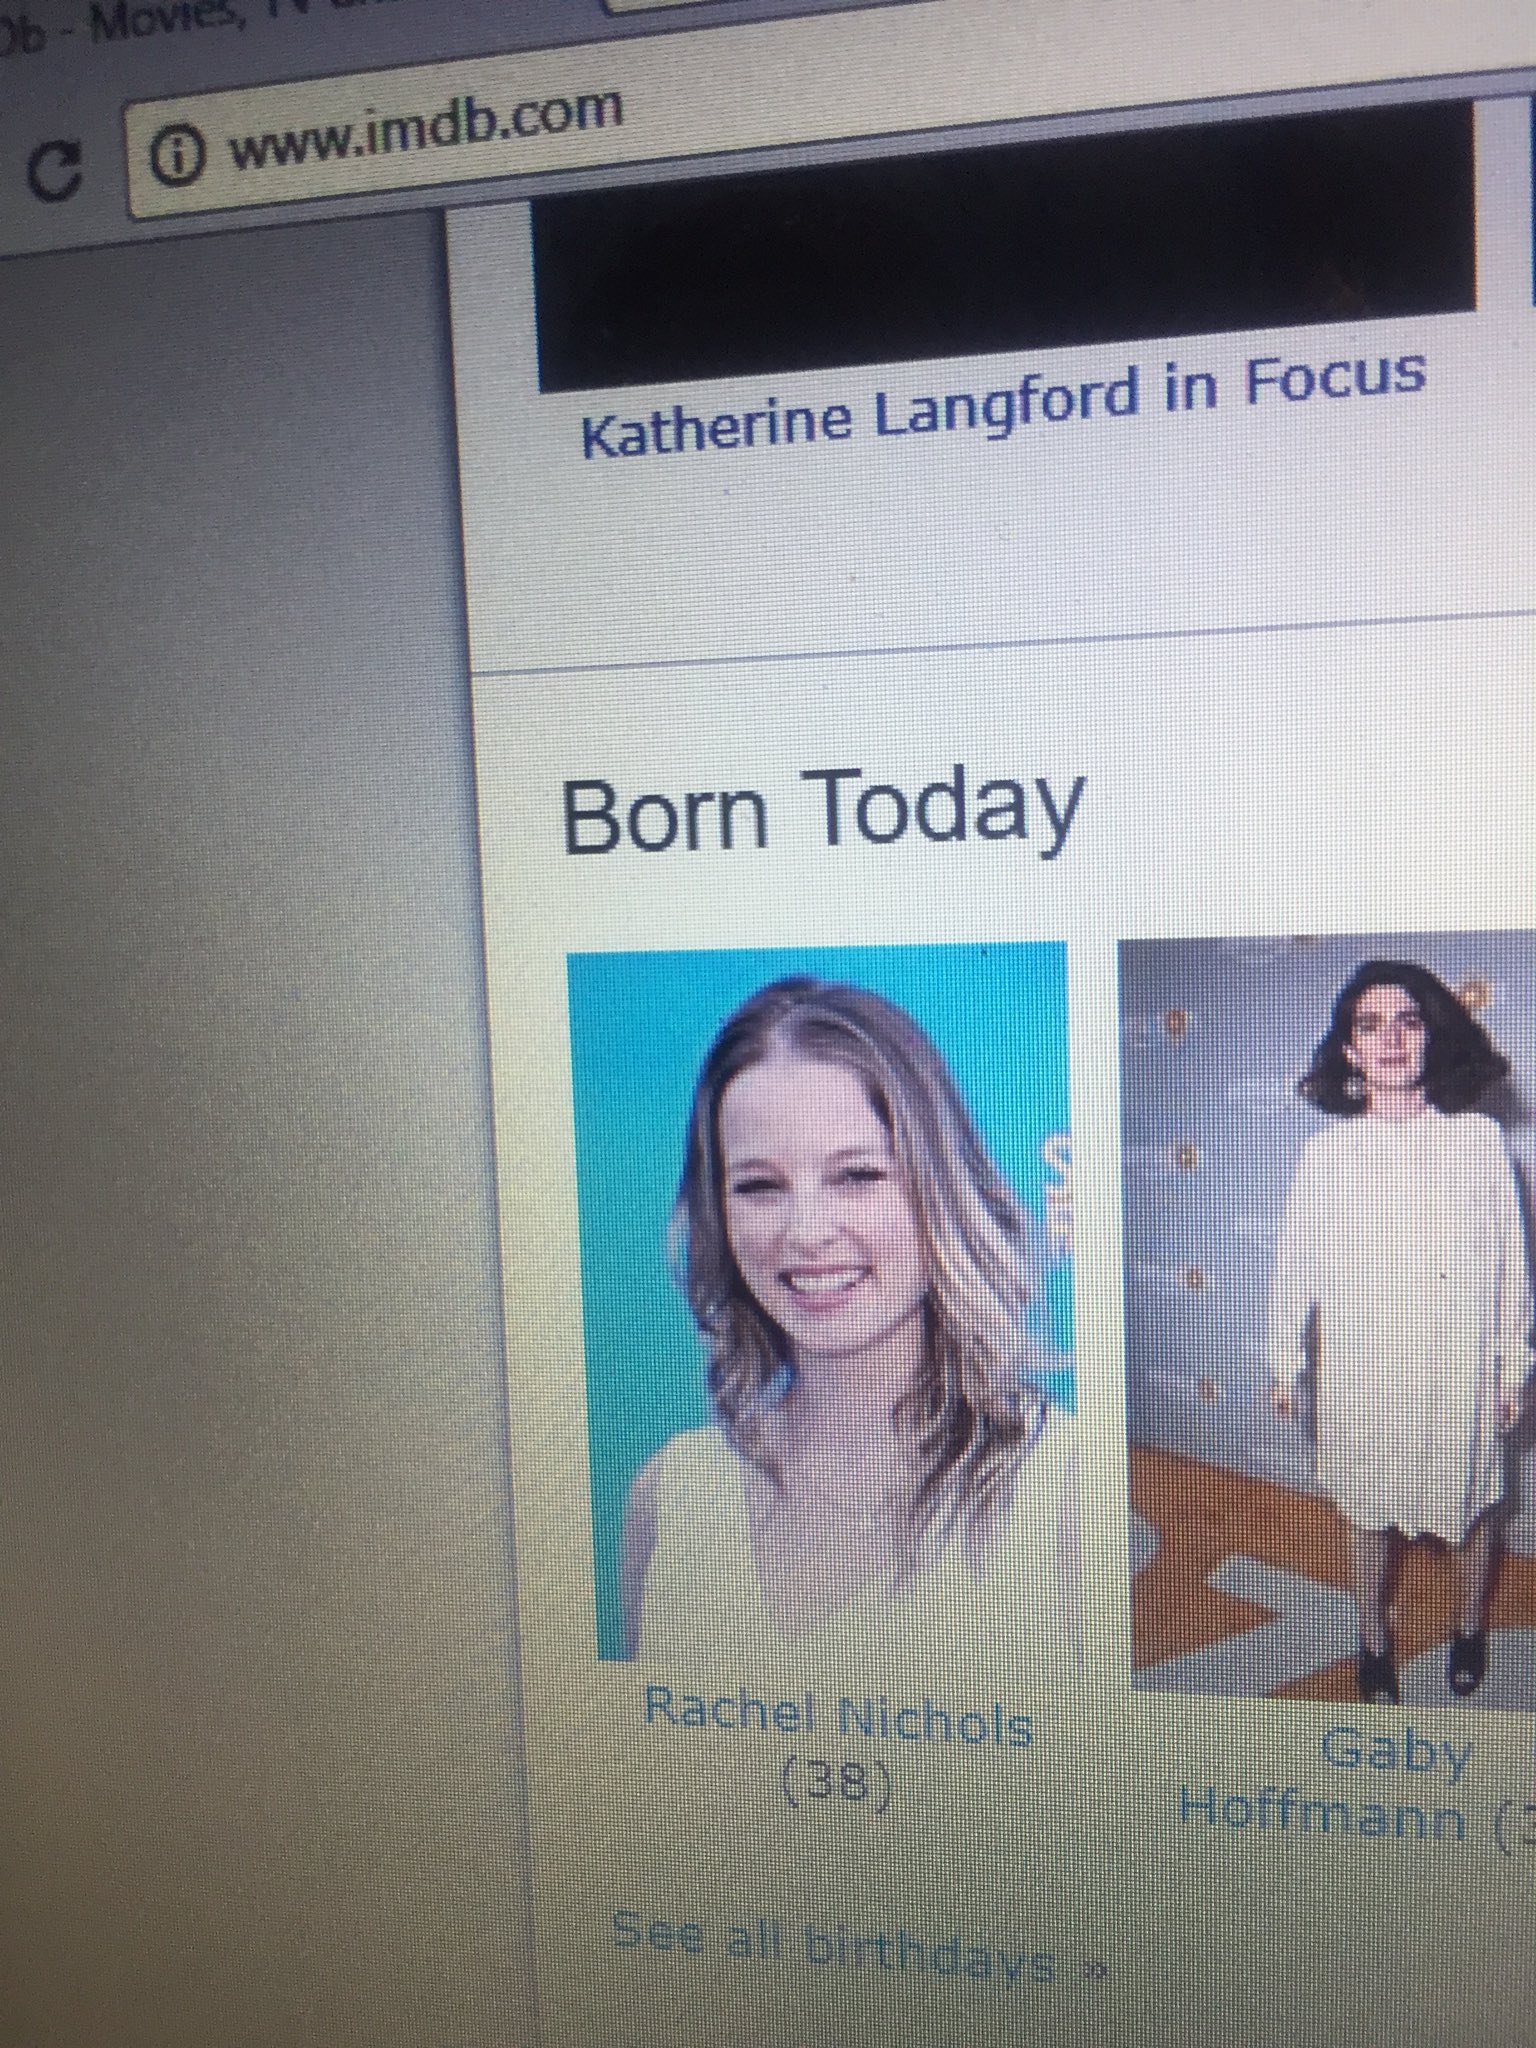  Happy Birthday Rachel! You look different though...did you do something with your hair? 